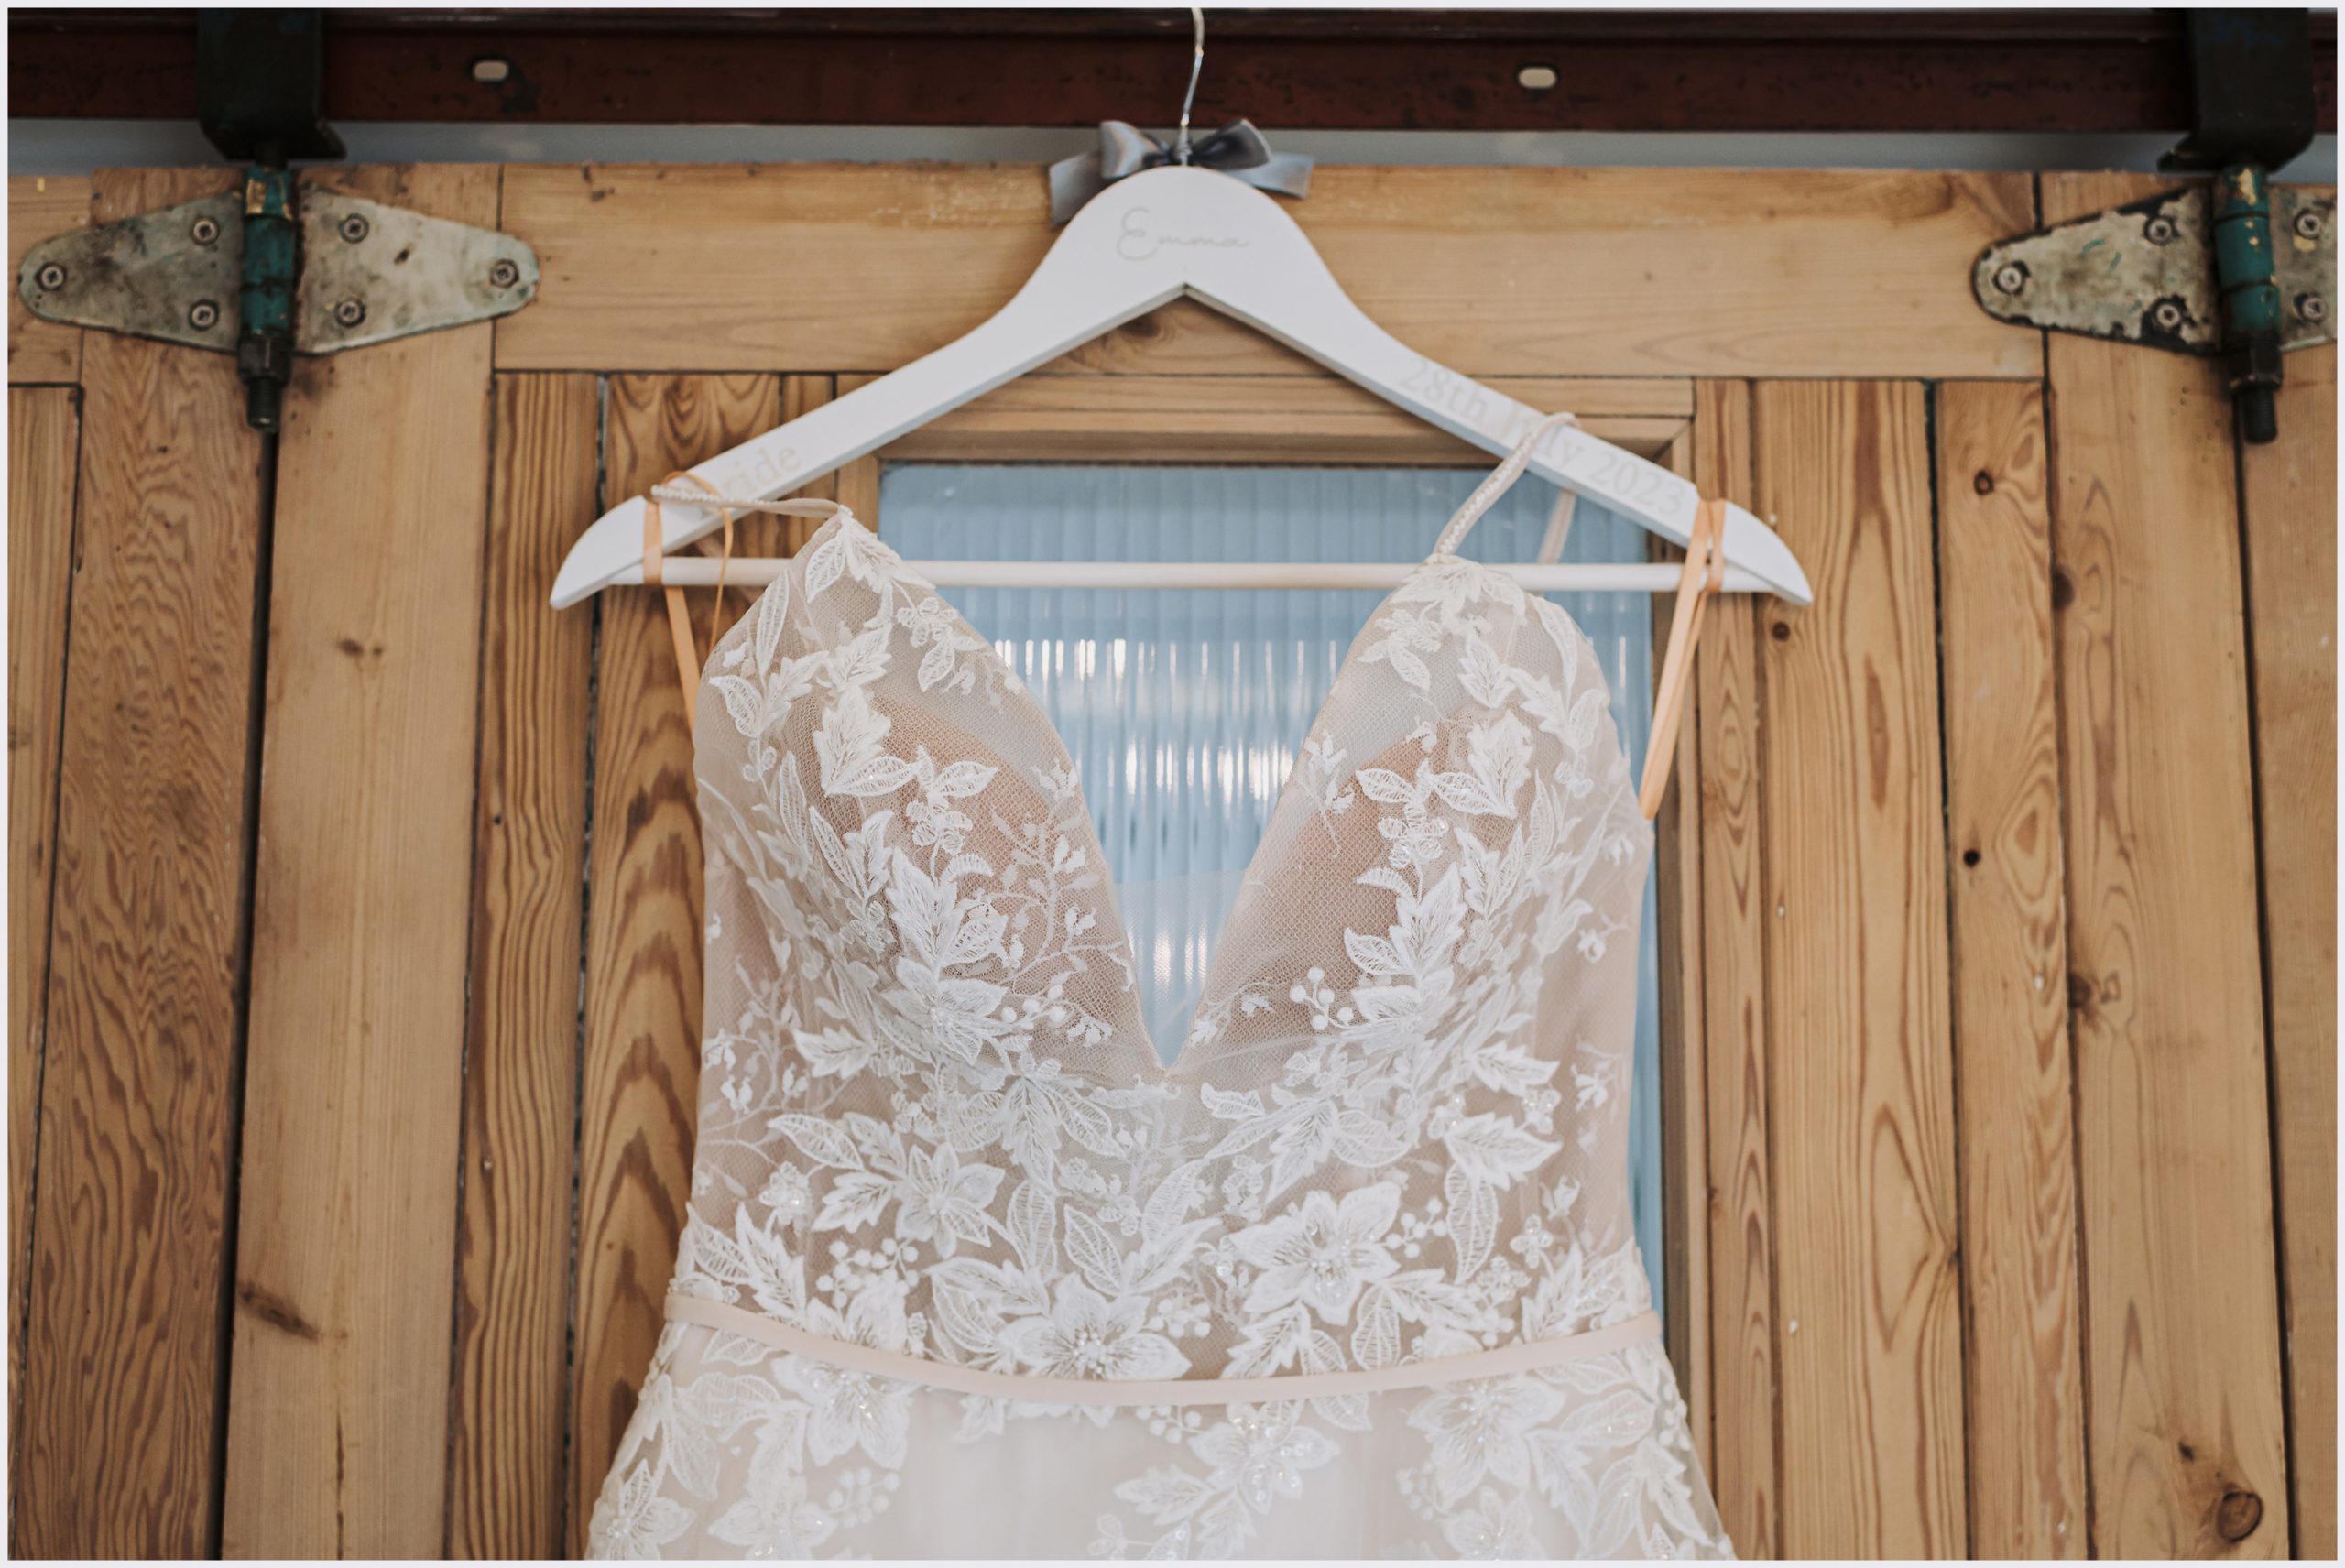 A beautiful wedding dress hanging against the rustic doors of a barn conversion